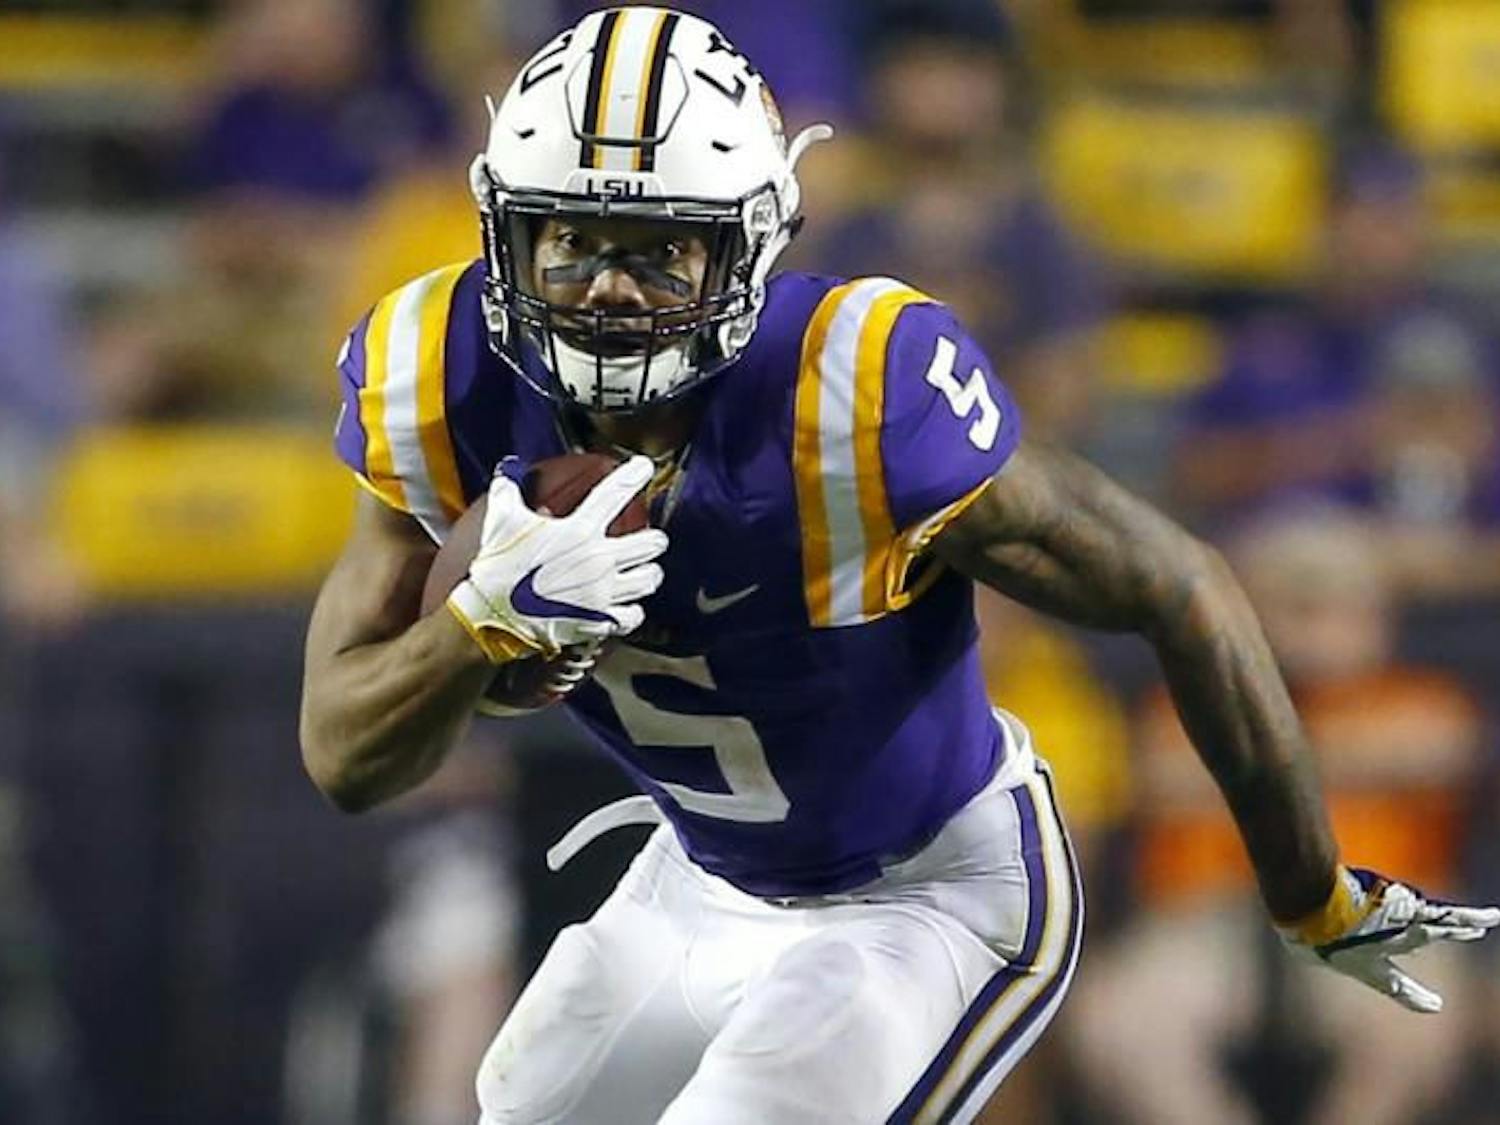 LSU running back Derrius Guice said he was asked if he liked men and if his mother was a prostitute by different teams leading up to the NFL Draft.&nbsp;